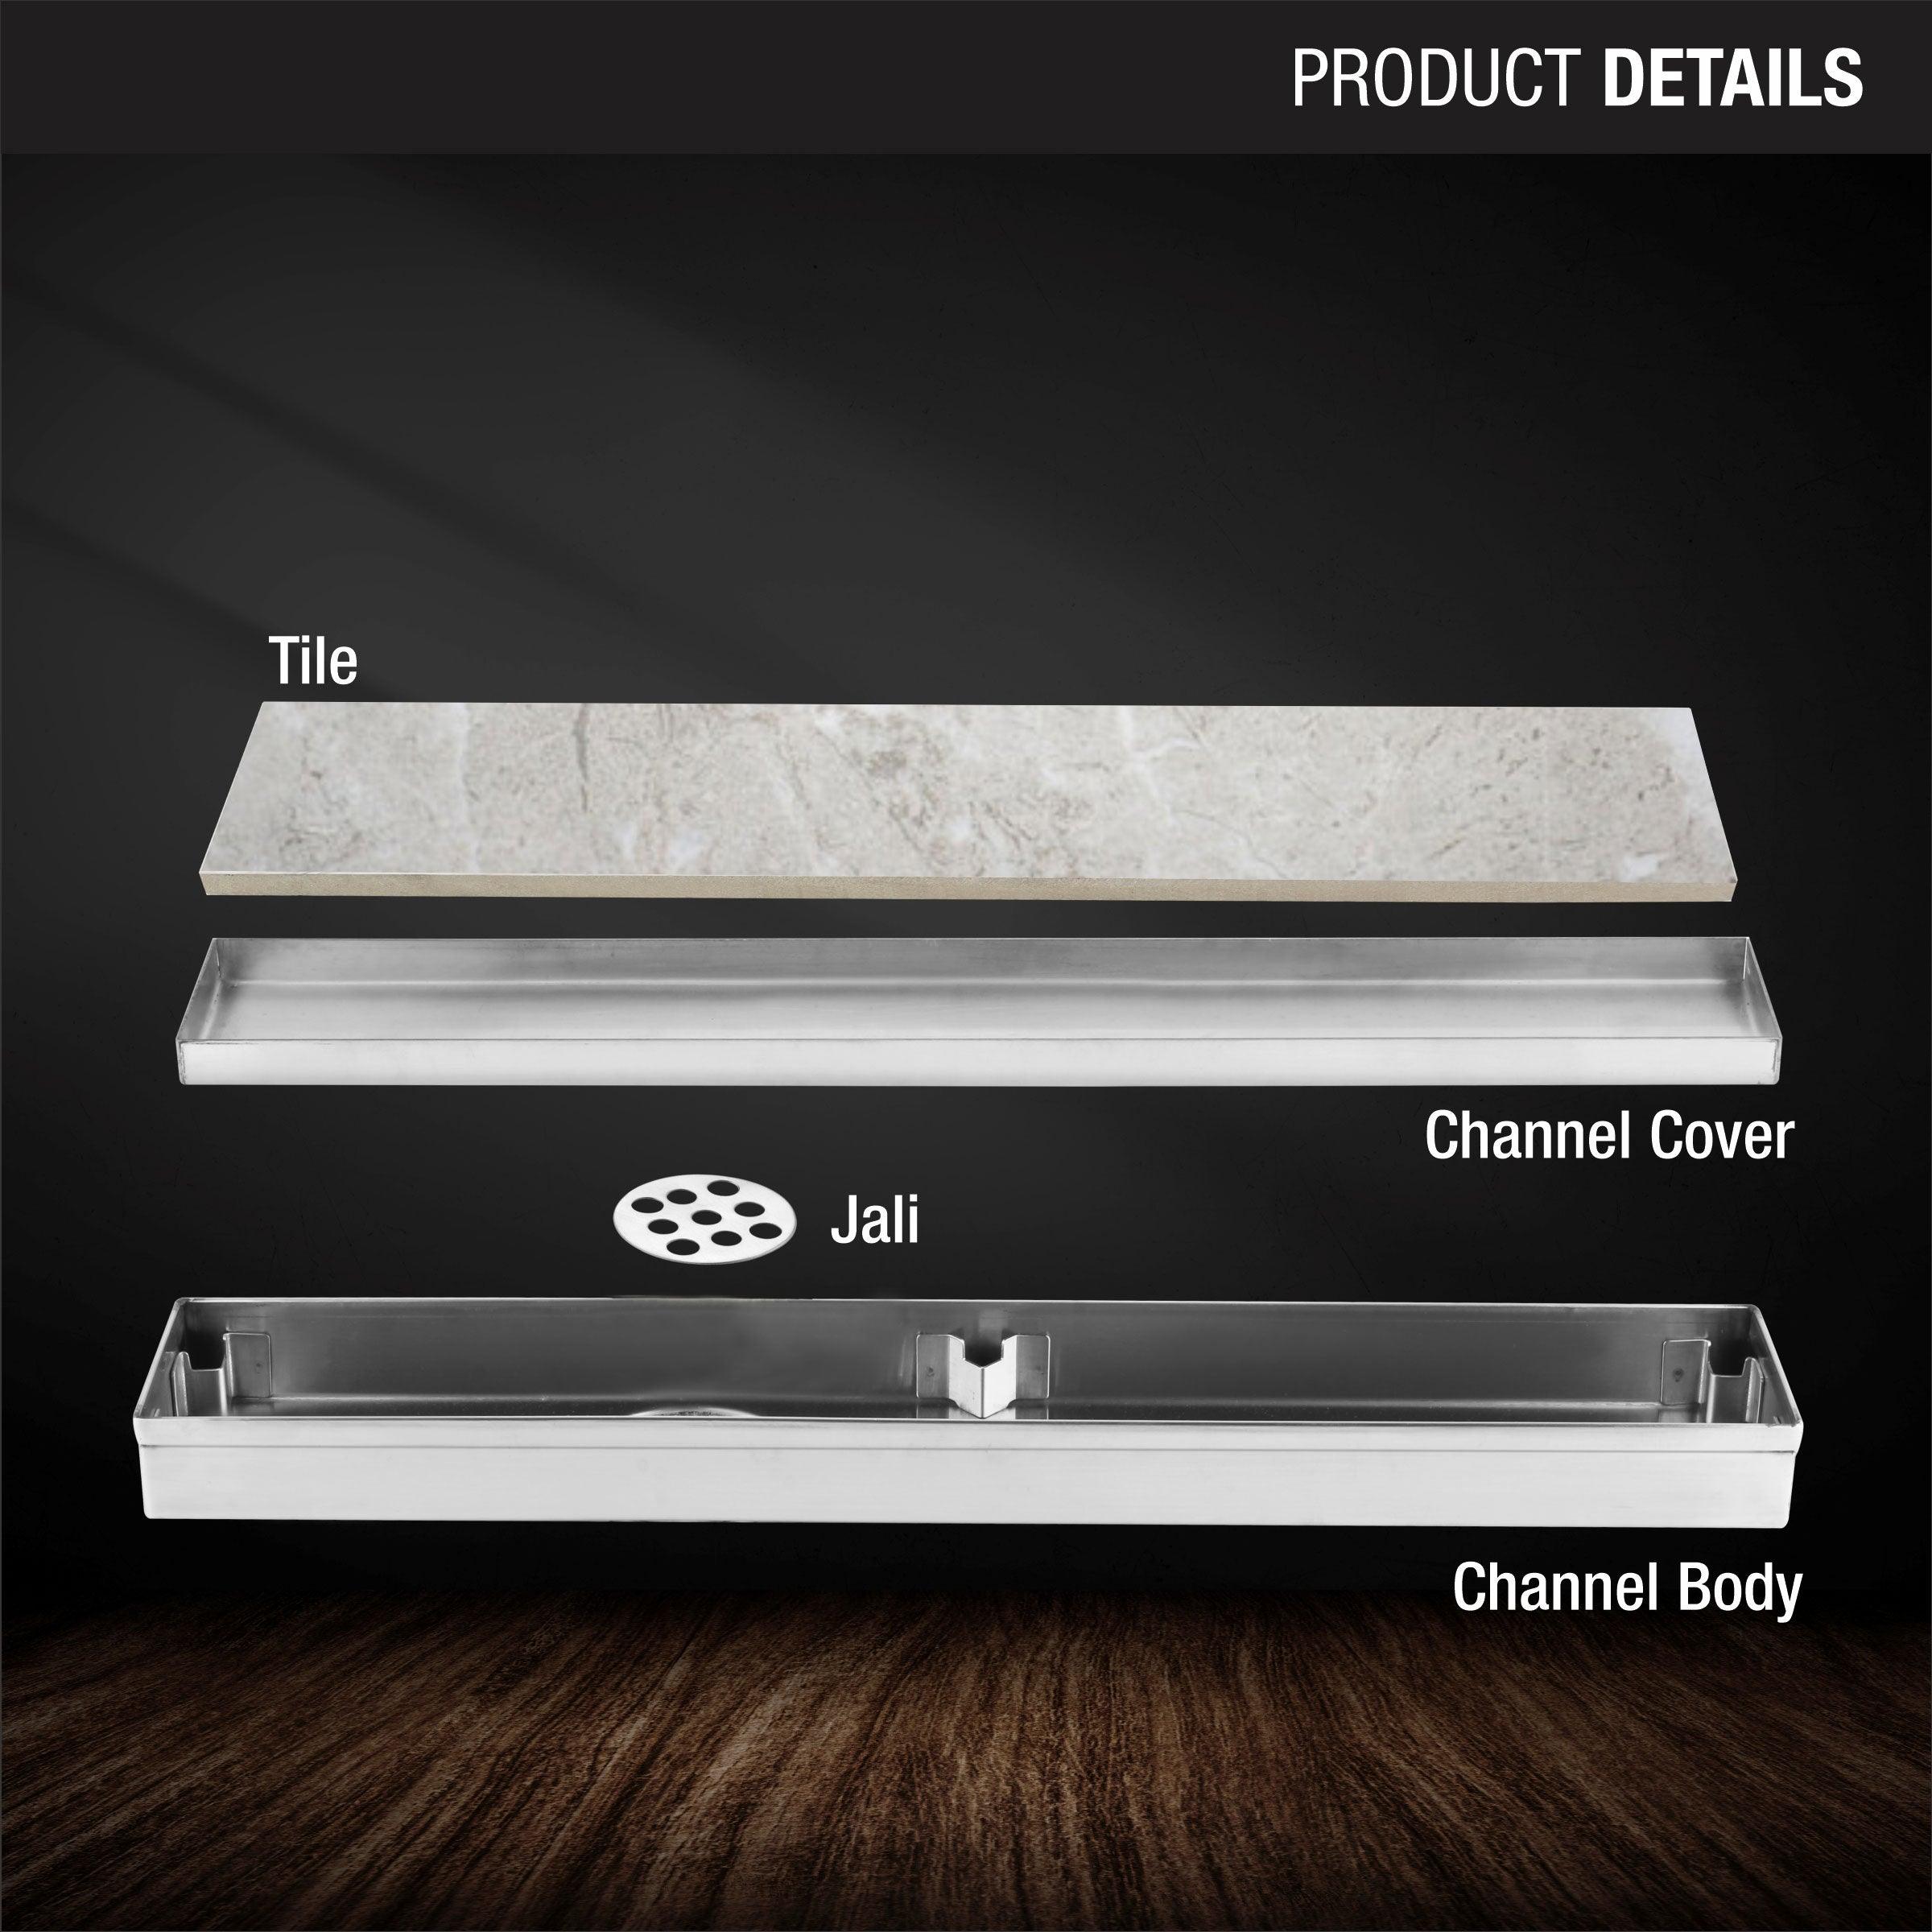 Tile Insert Shower Drain Channel (12 x 2 Inches) product details